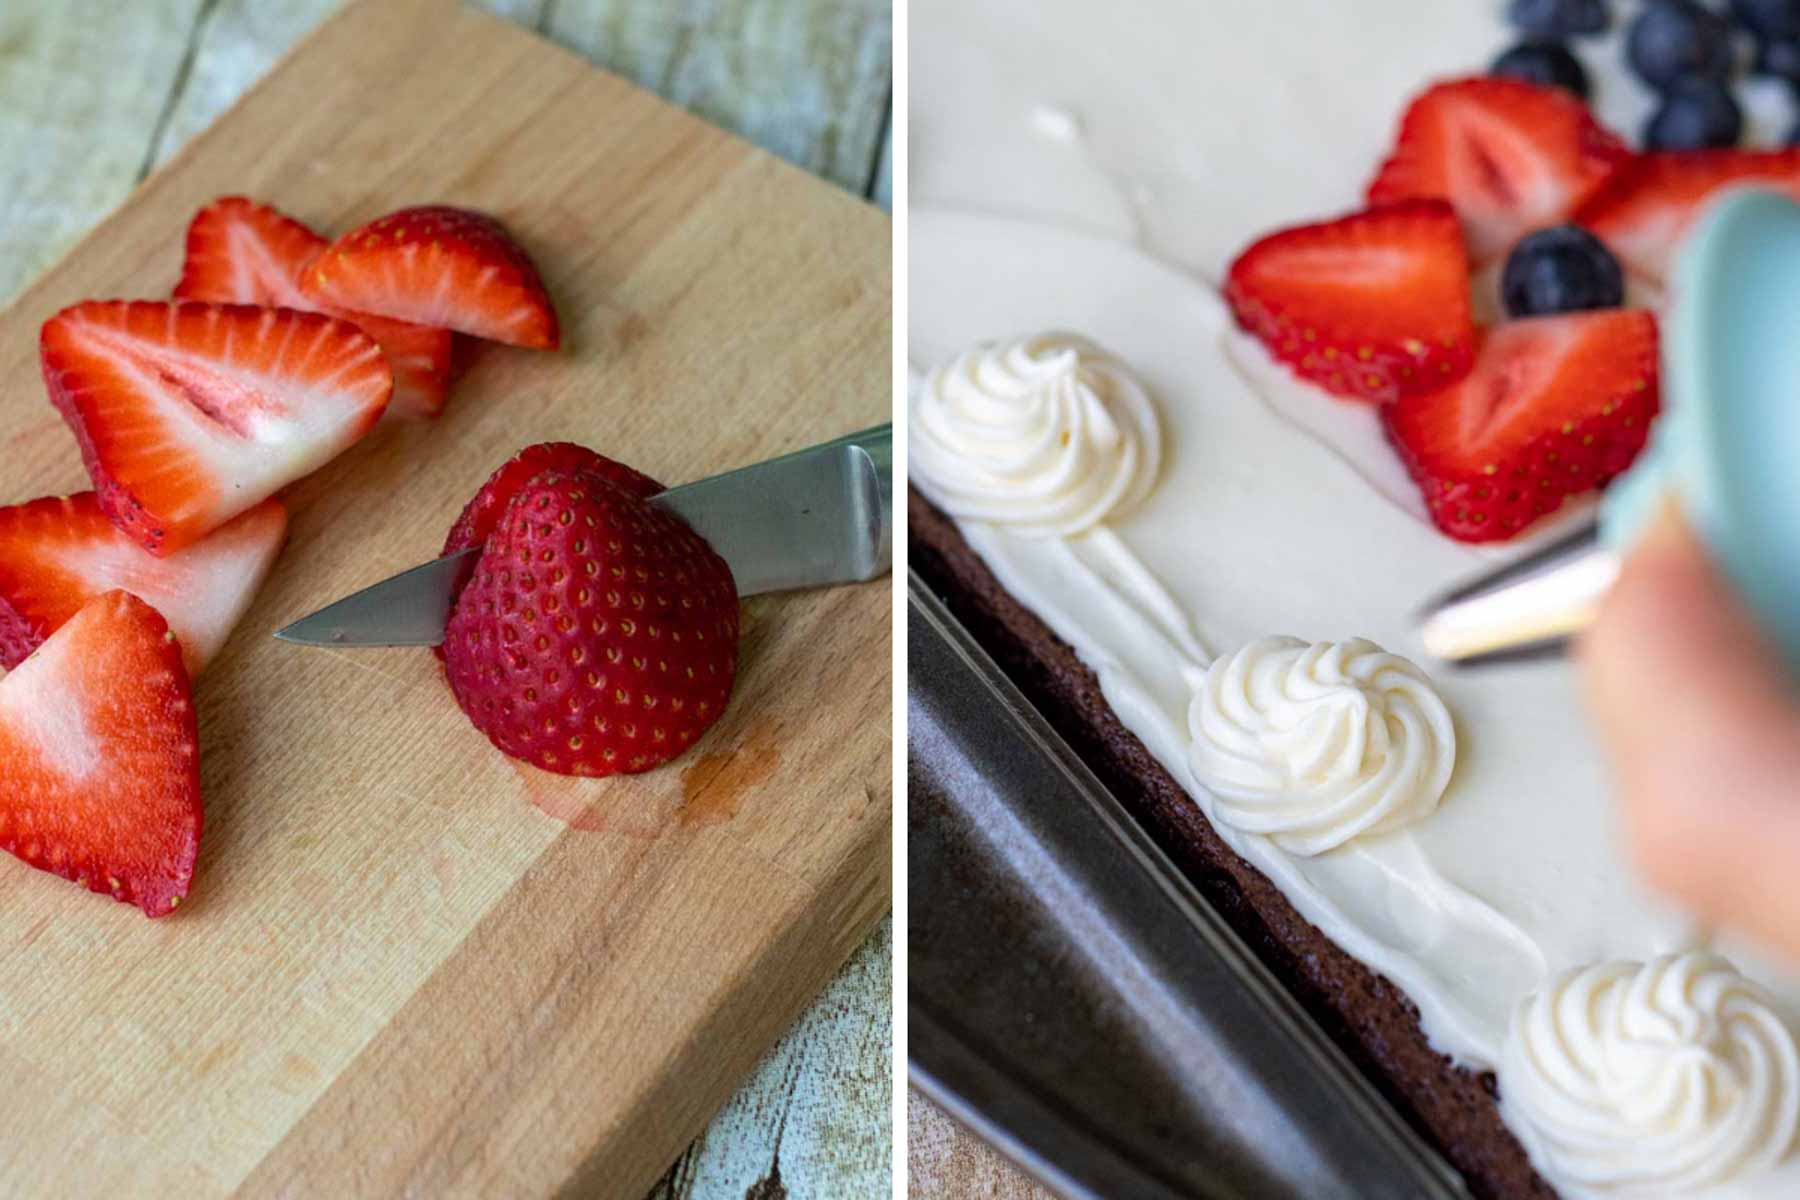 images showing how to cut strawberries and piping on frosting